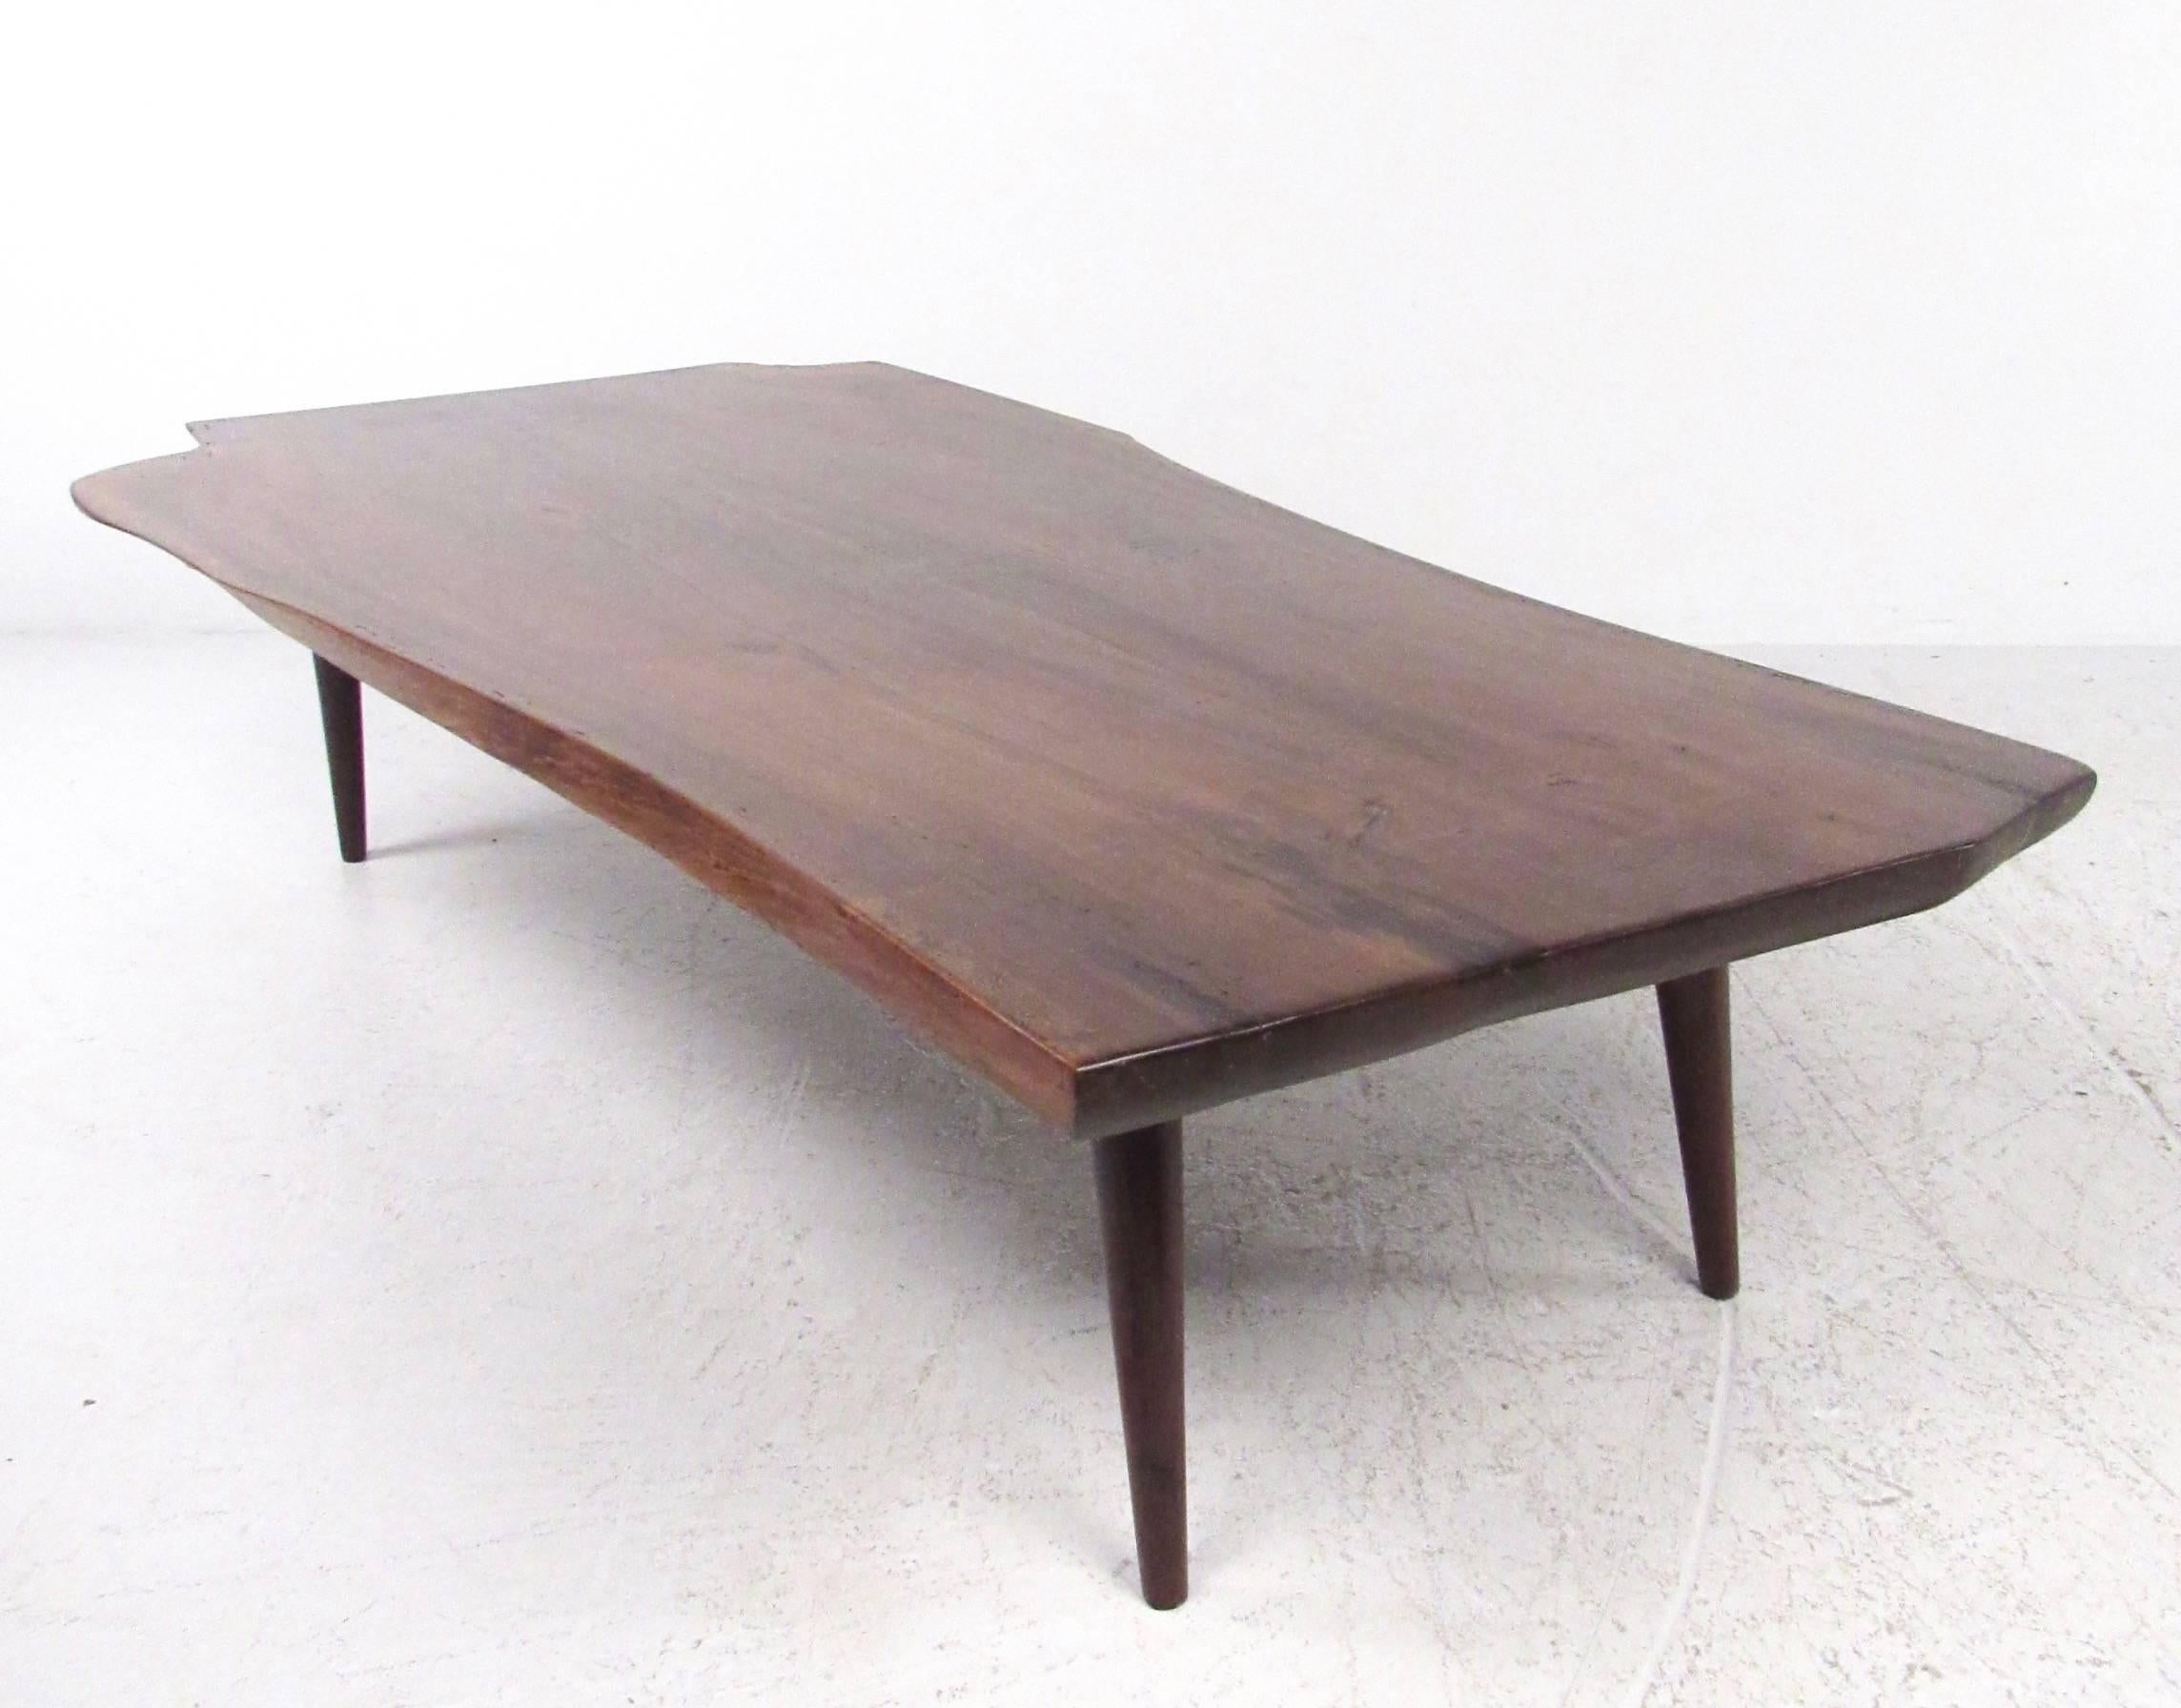 This vintage modern live edge coffee table features Nakashima style hardwood construction with tapered legs and bow tie joints. The high quality craftsmanship evident in this unique tree slab table make it an impressive centerpiece to any home or